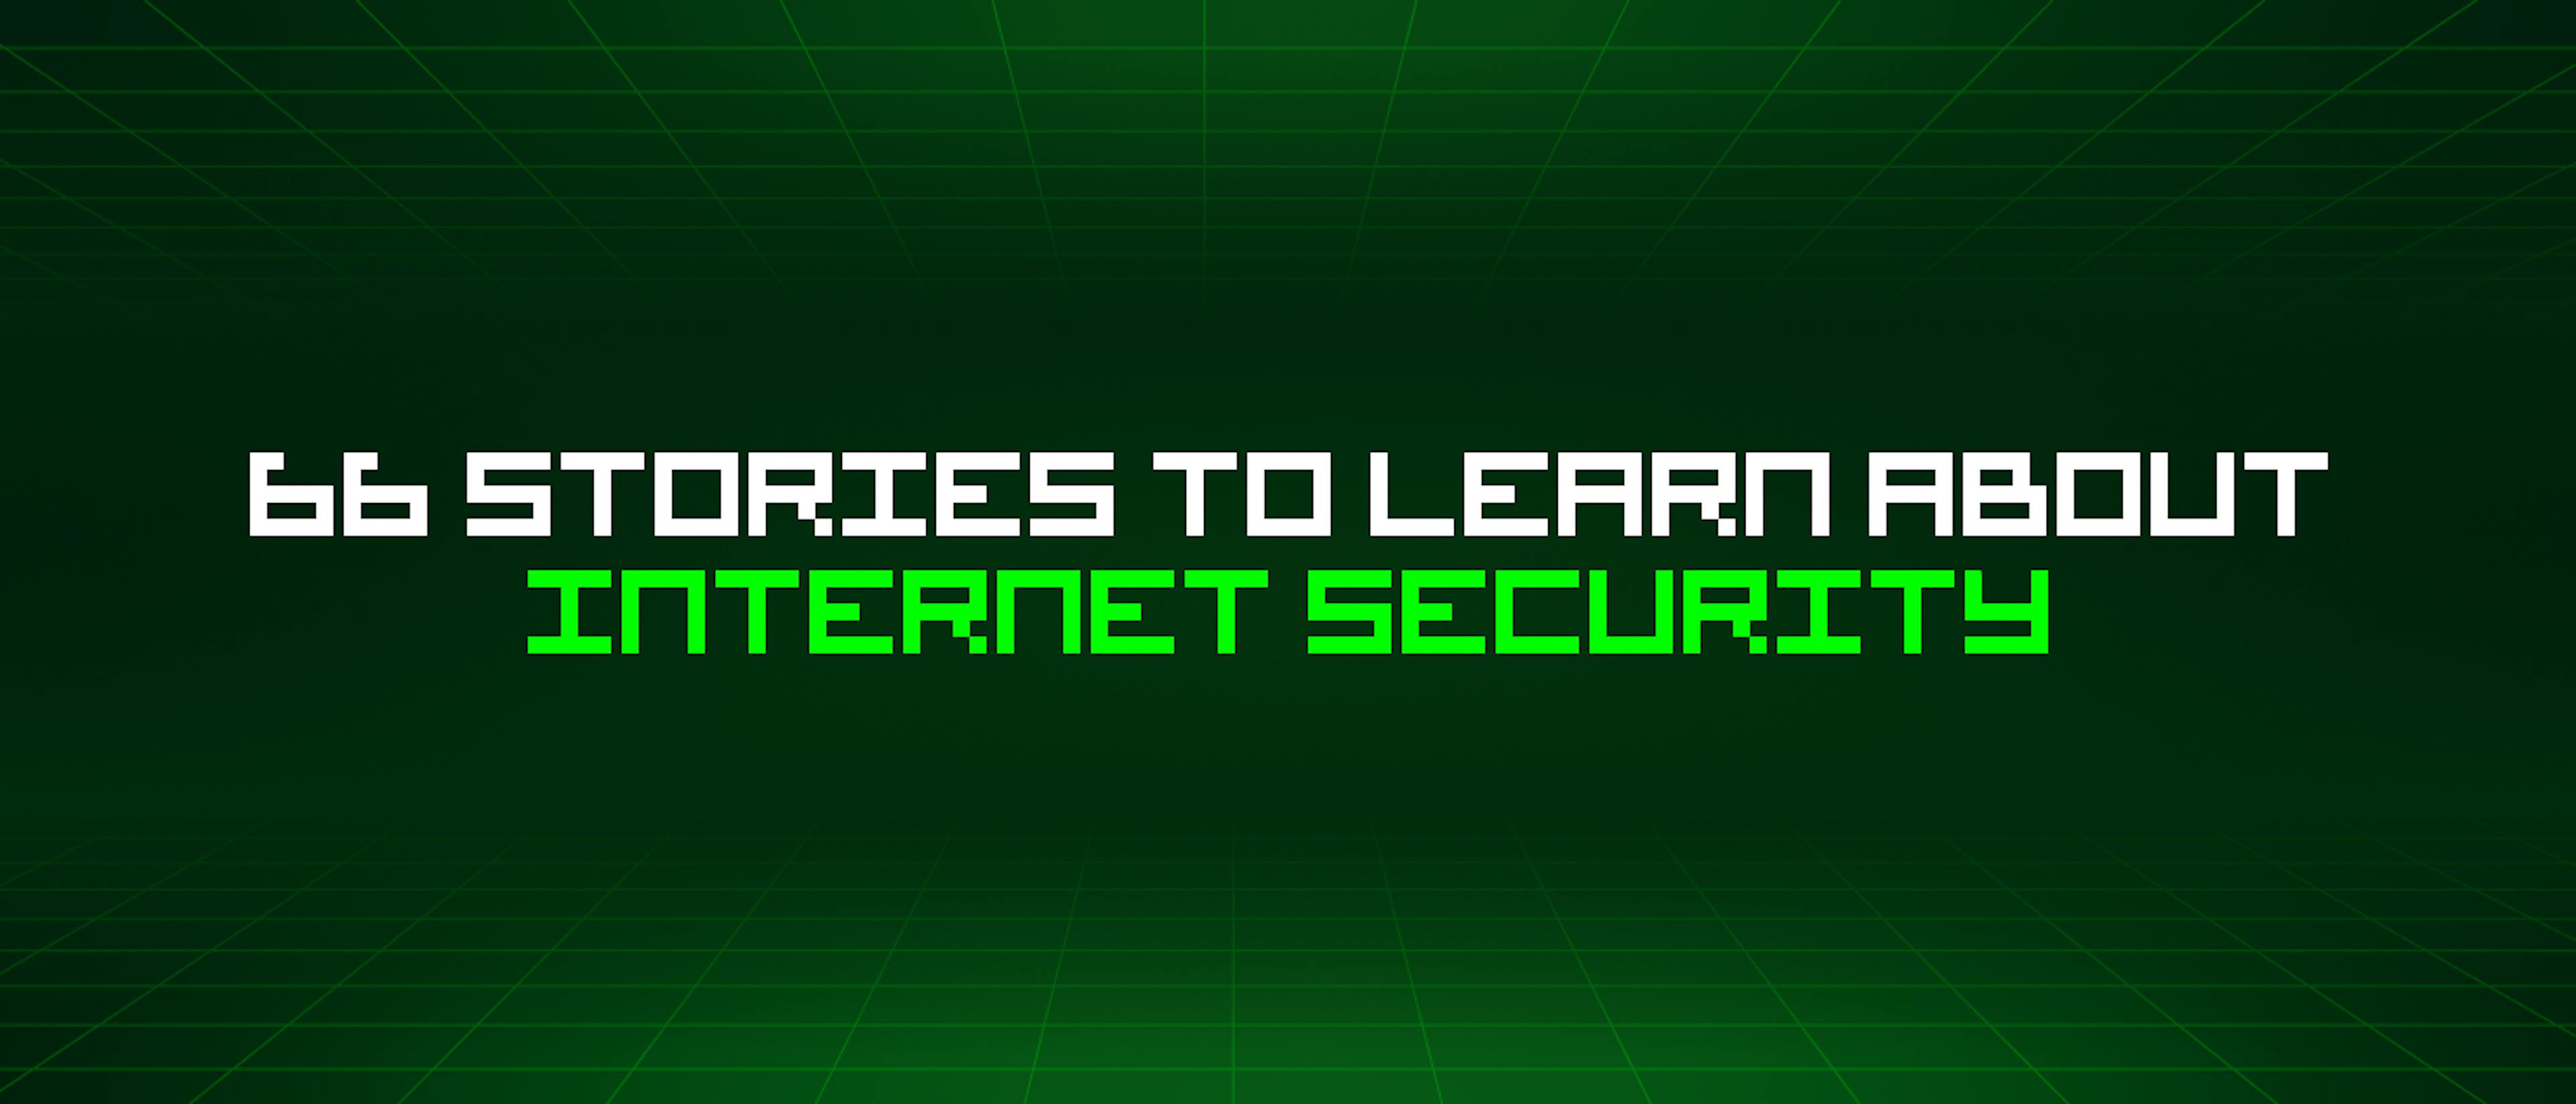 featured image - 66 Stories To Learn About Internet Security